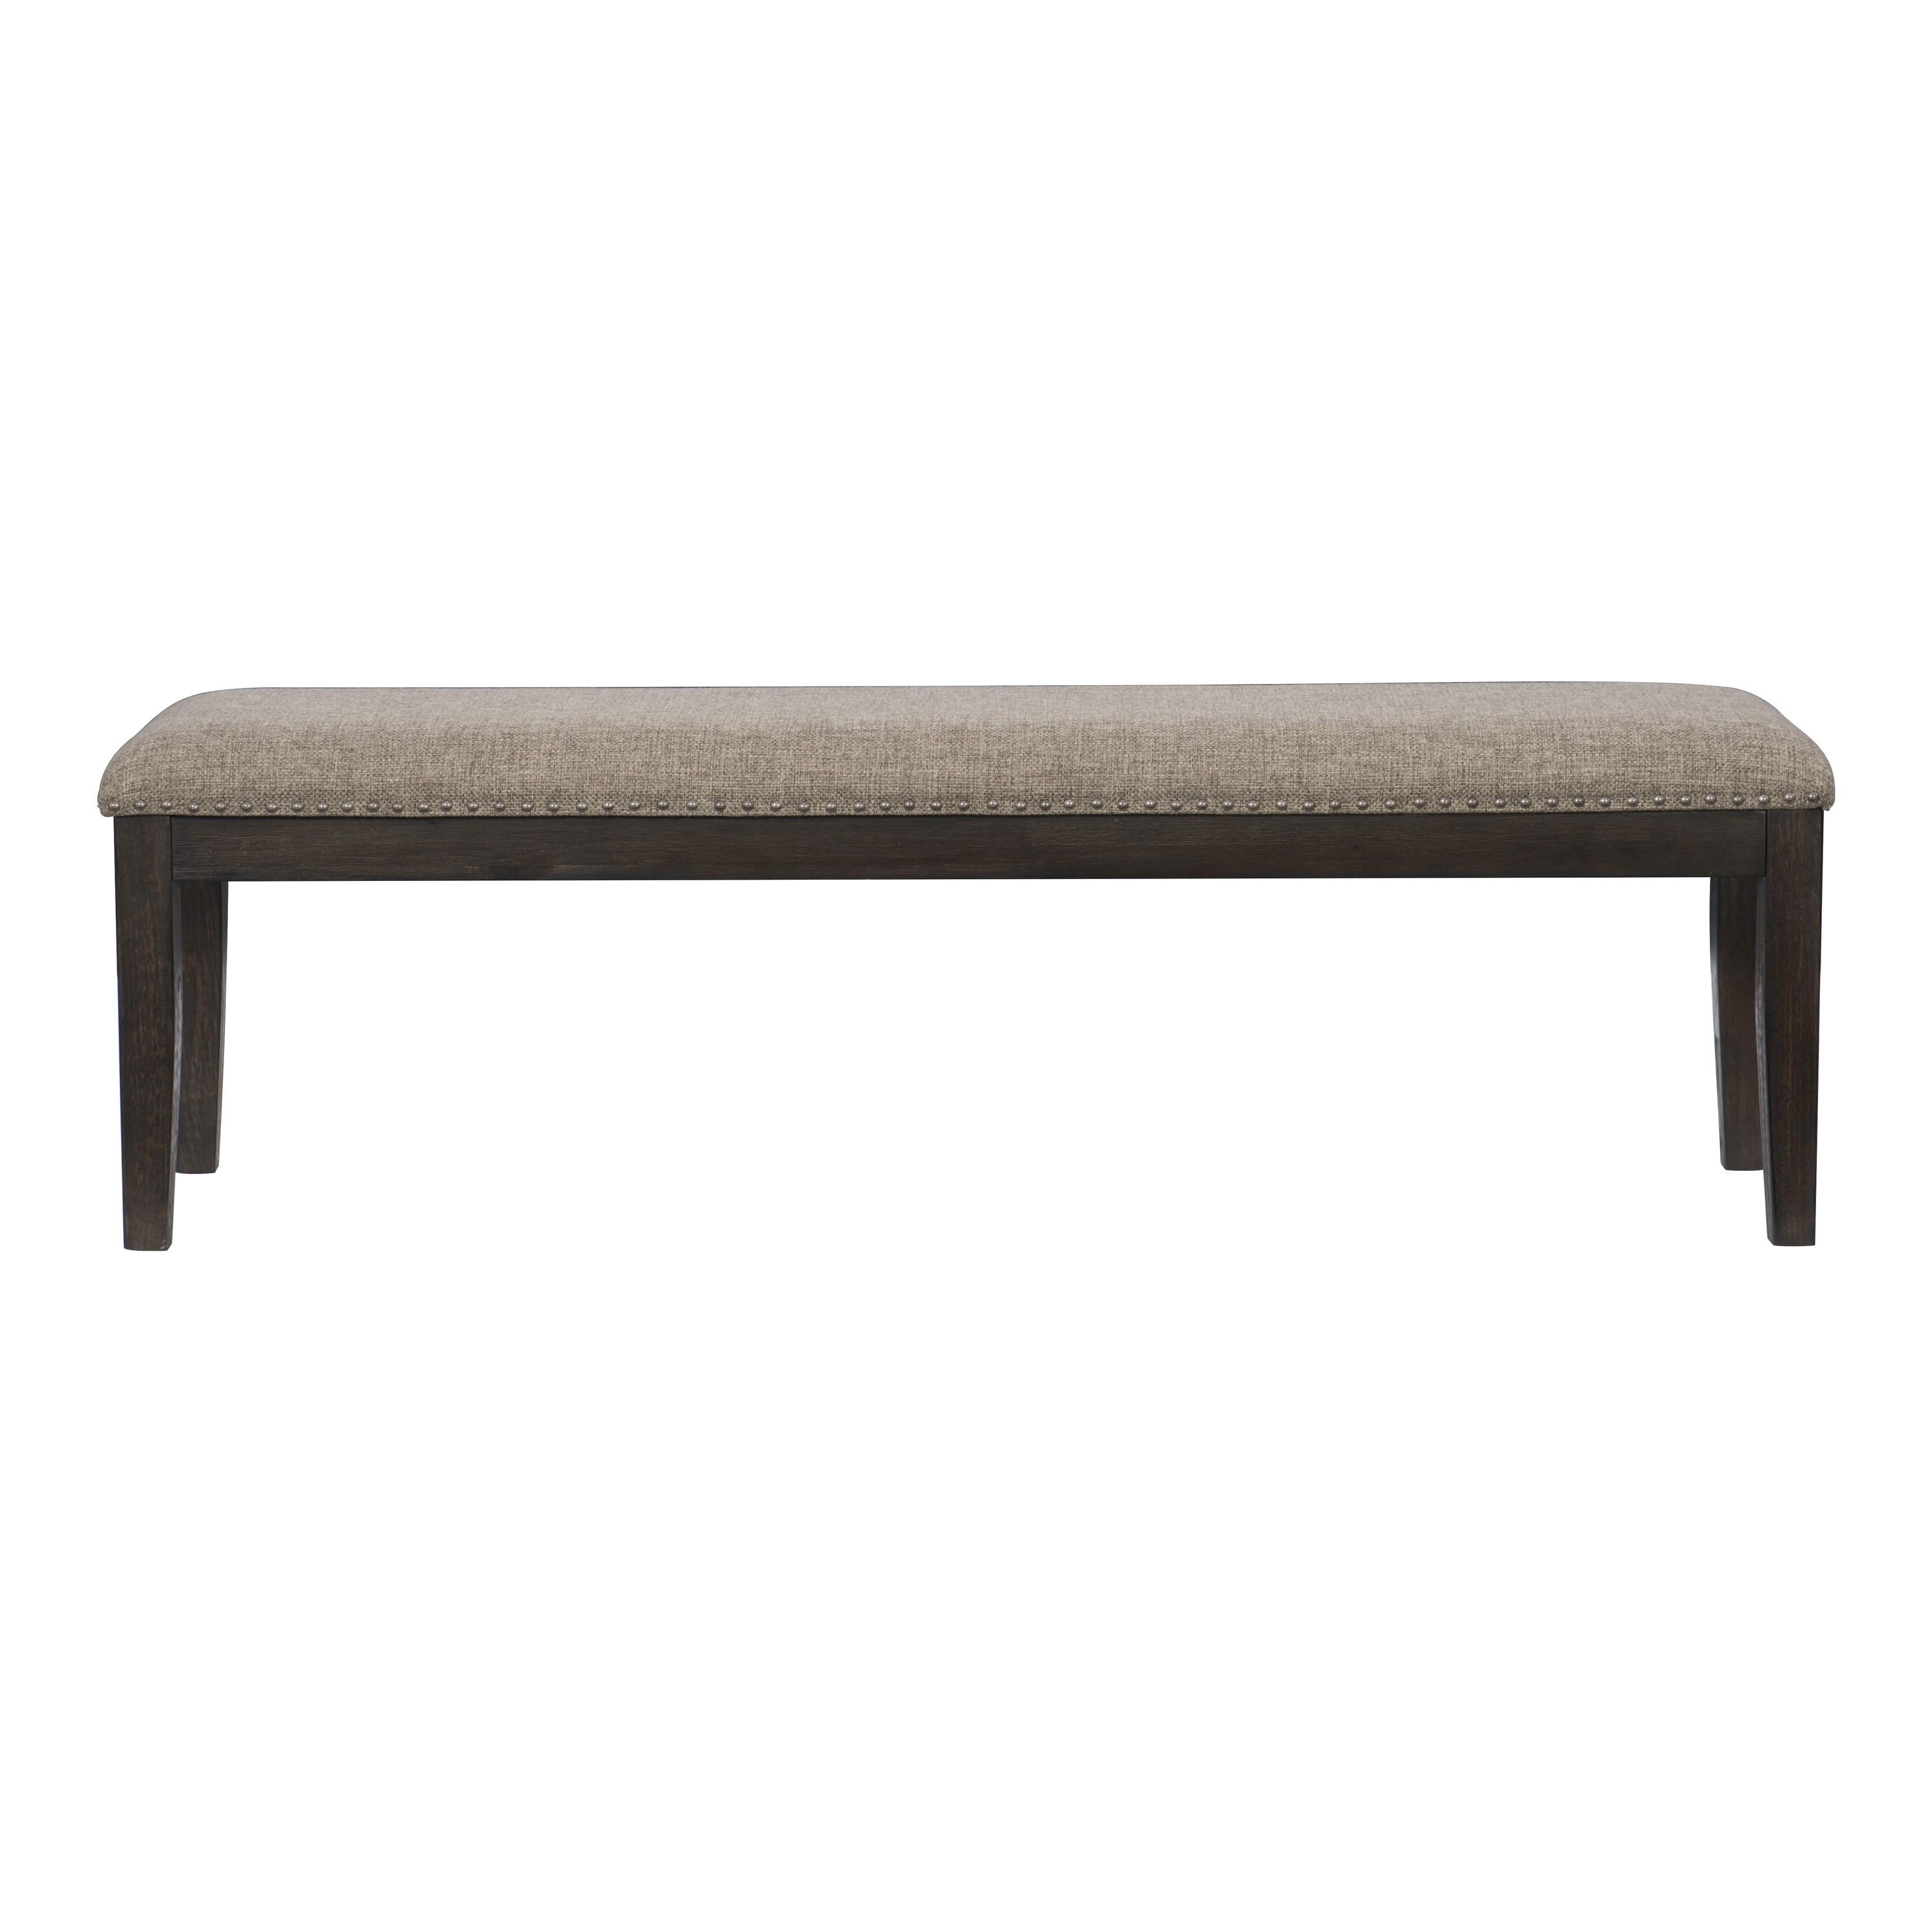 

    
Traditional Rustic Brown Wood Bench Homelegance 5741-13 Southlake
